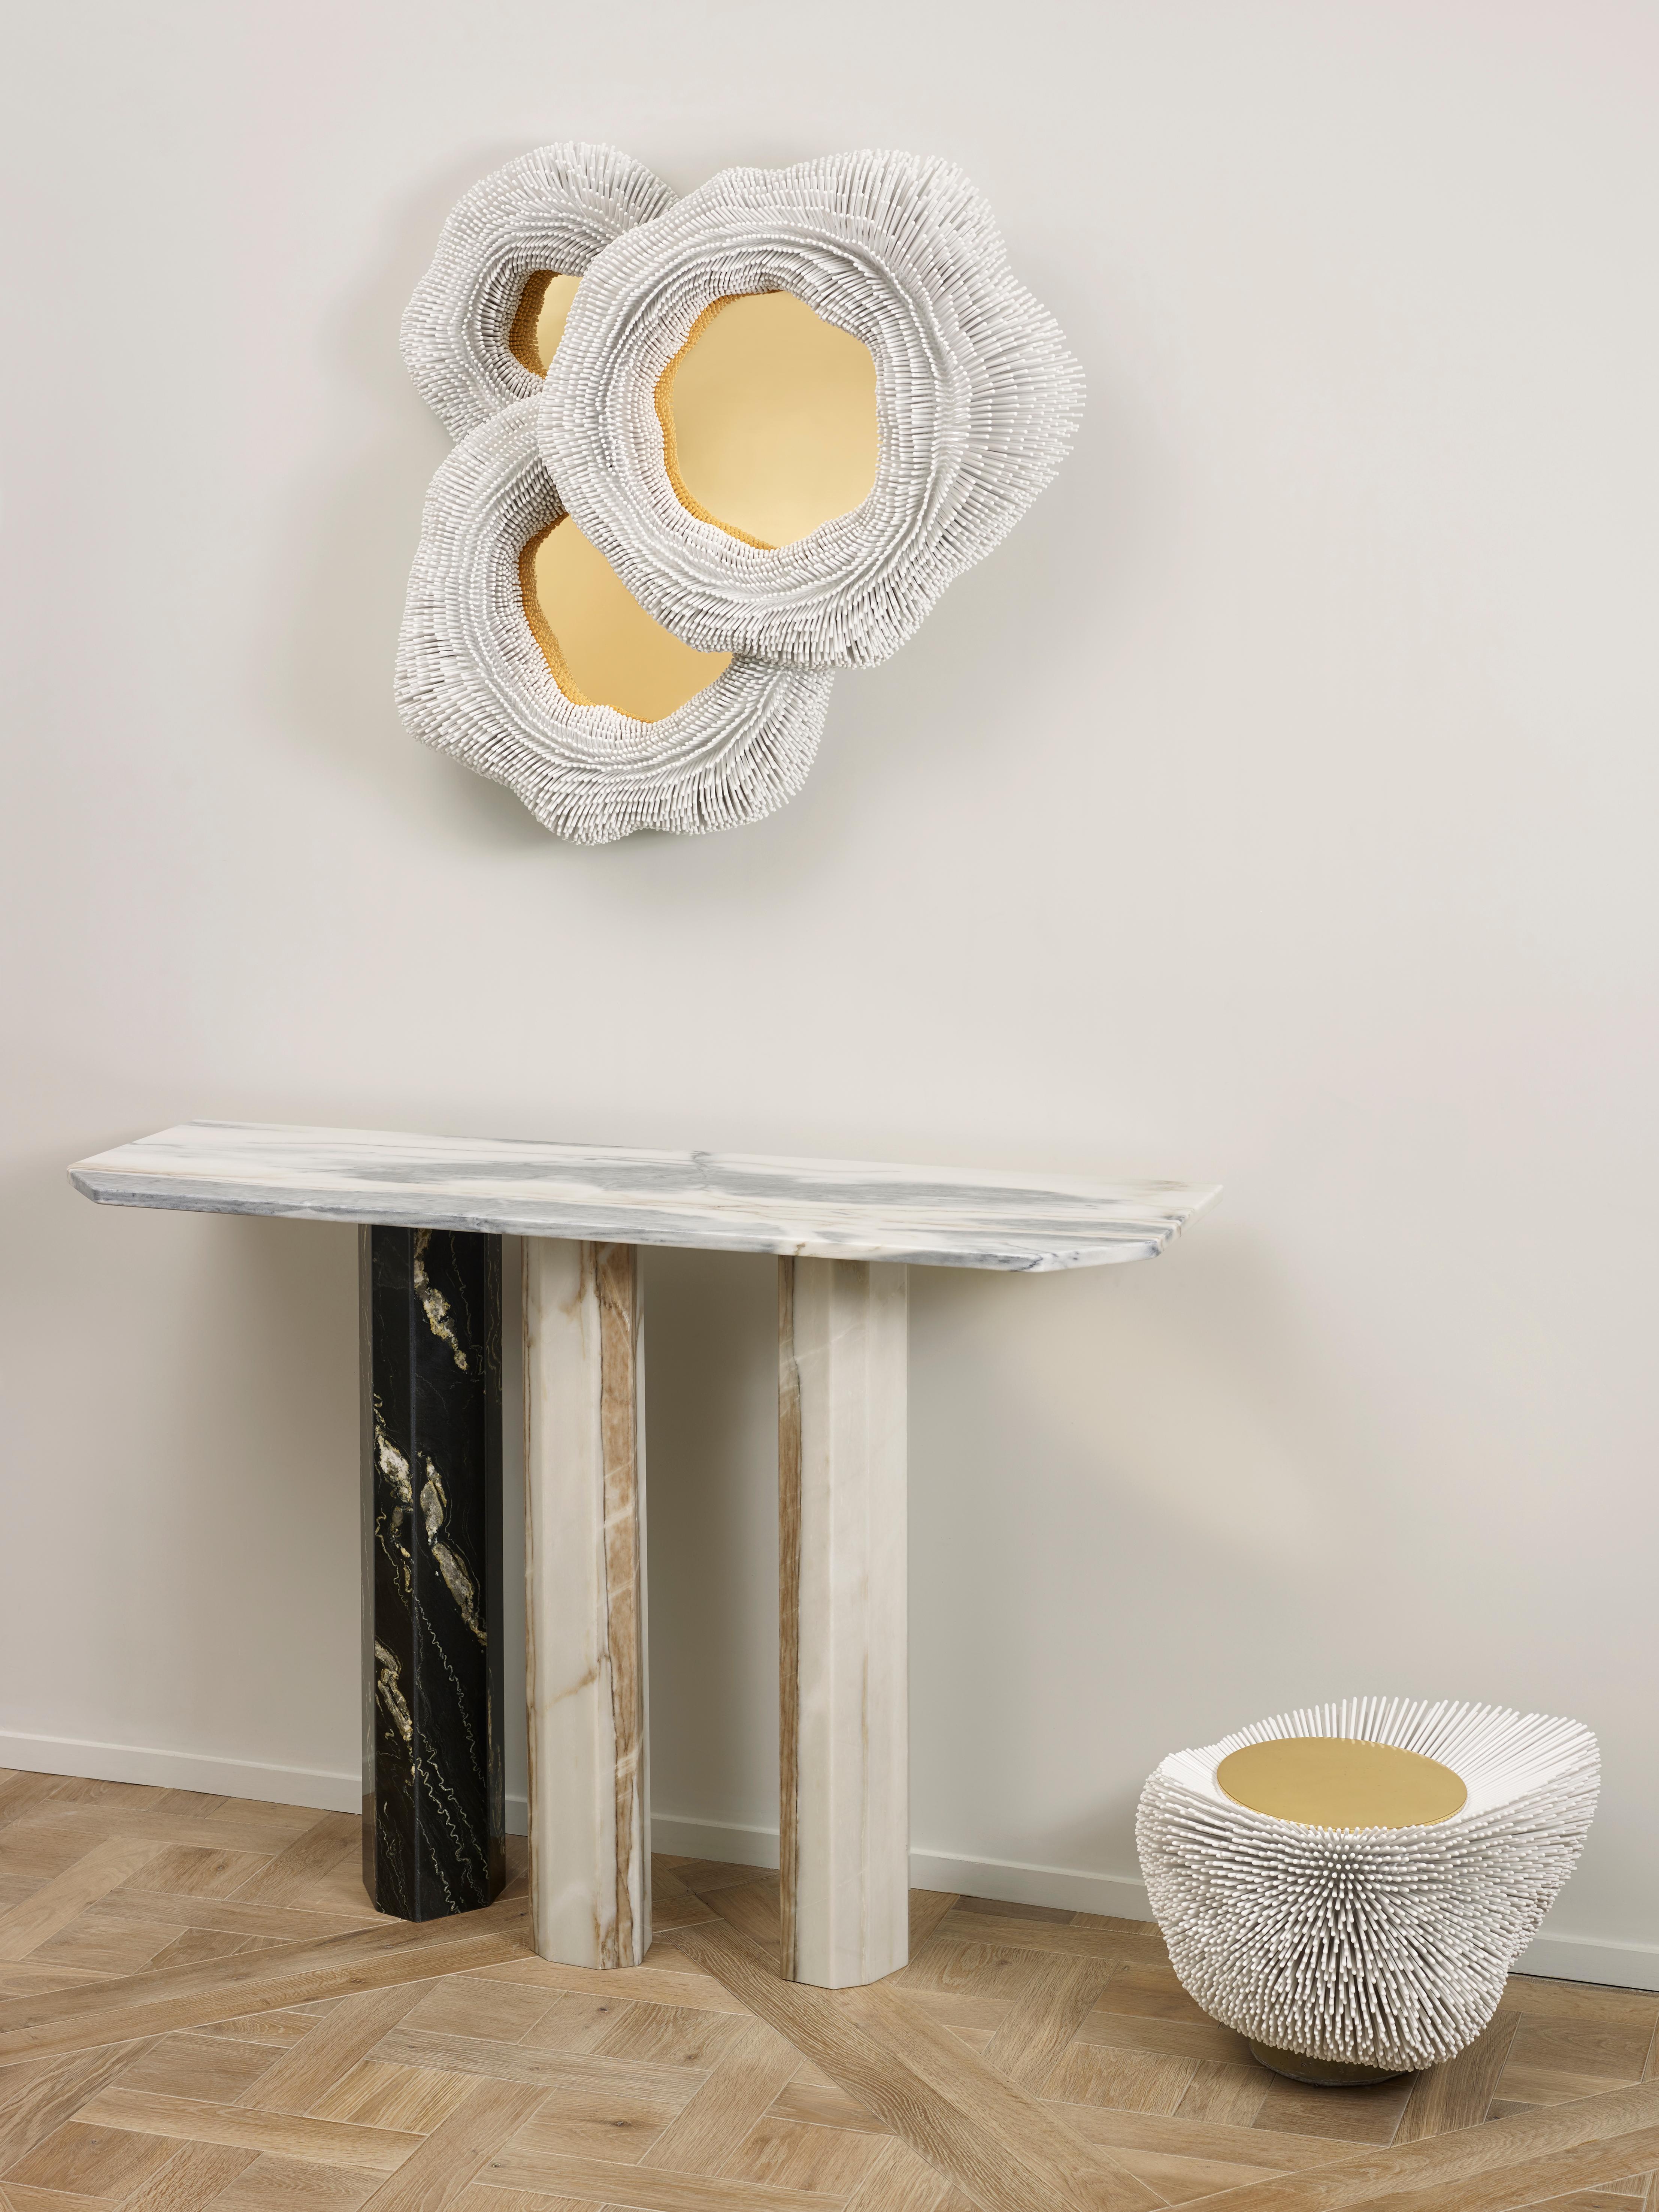 'Sea Anemone' Mirror, includes Three Mirrors Coloured in Gold - Medium Size In New Condition For Sale In Paris, FR